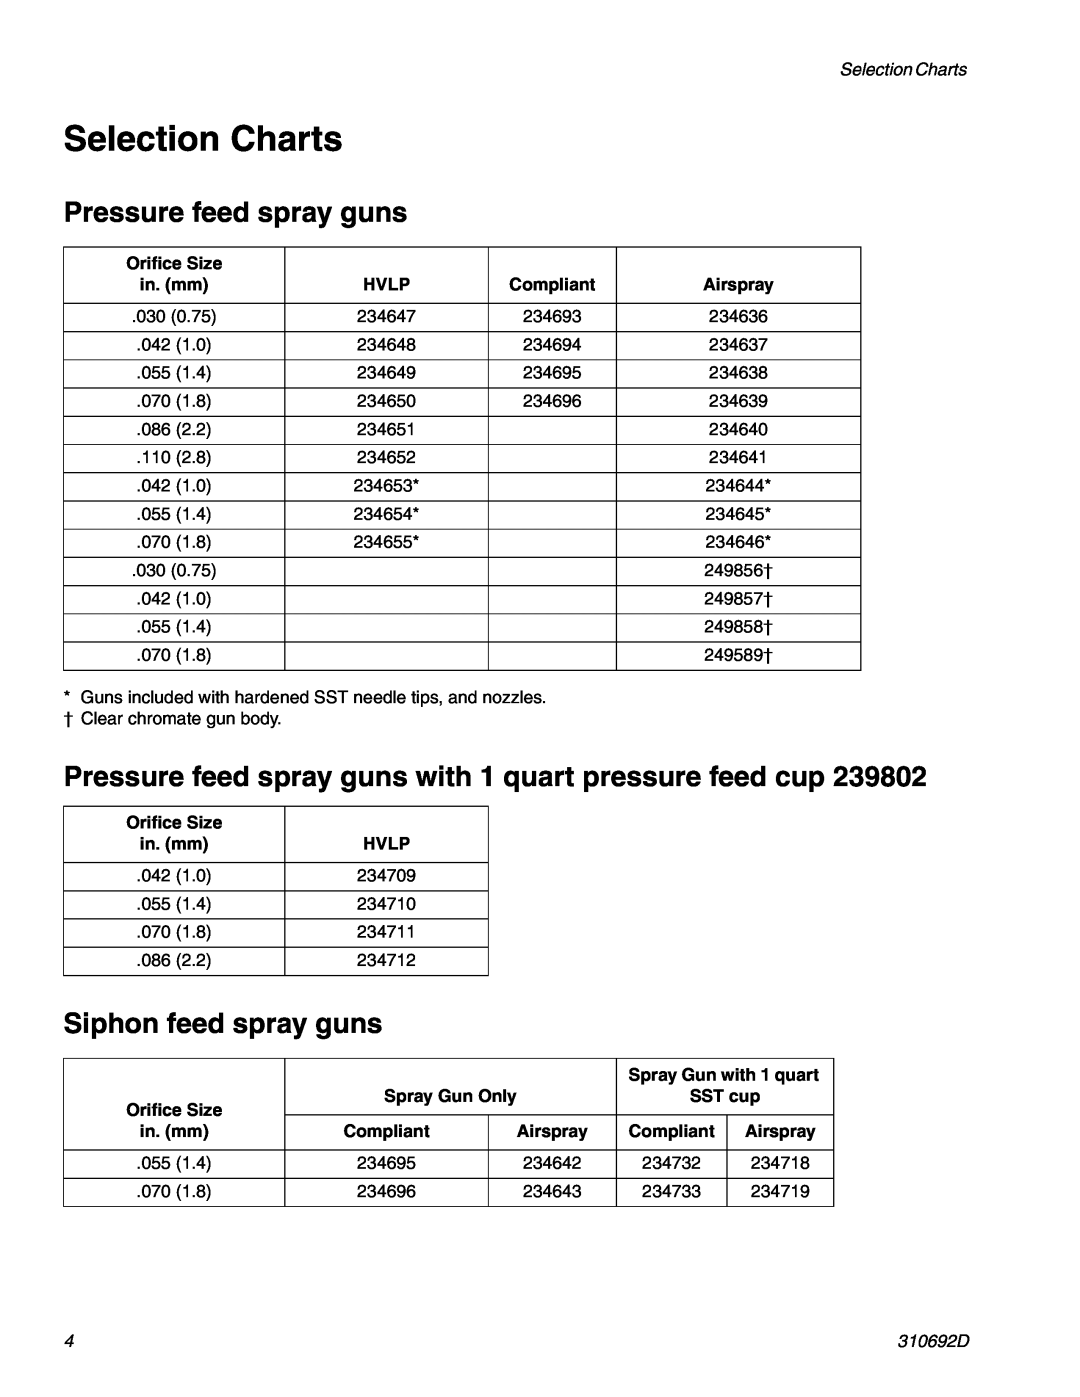 Graco 310692D Selection Charts, Pressure feed spray guns with 1 quart pressure feed cup, Siphon feed spray guns, Hvlp 